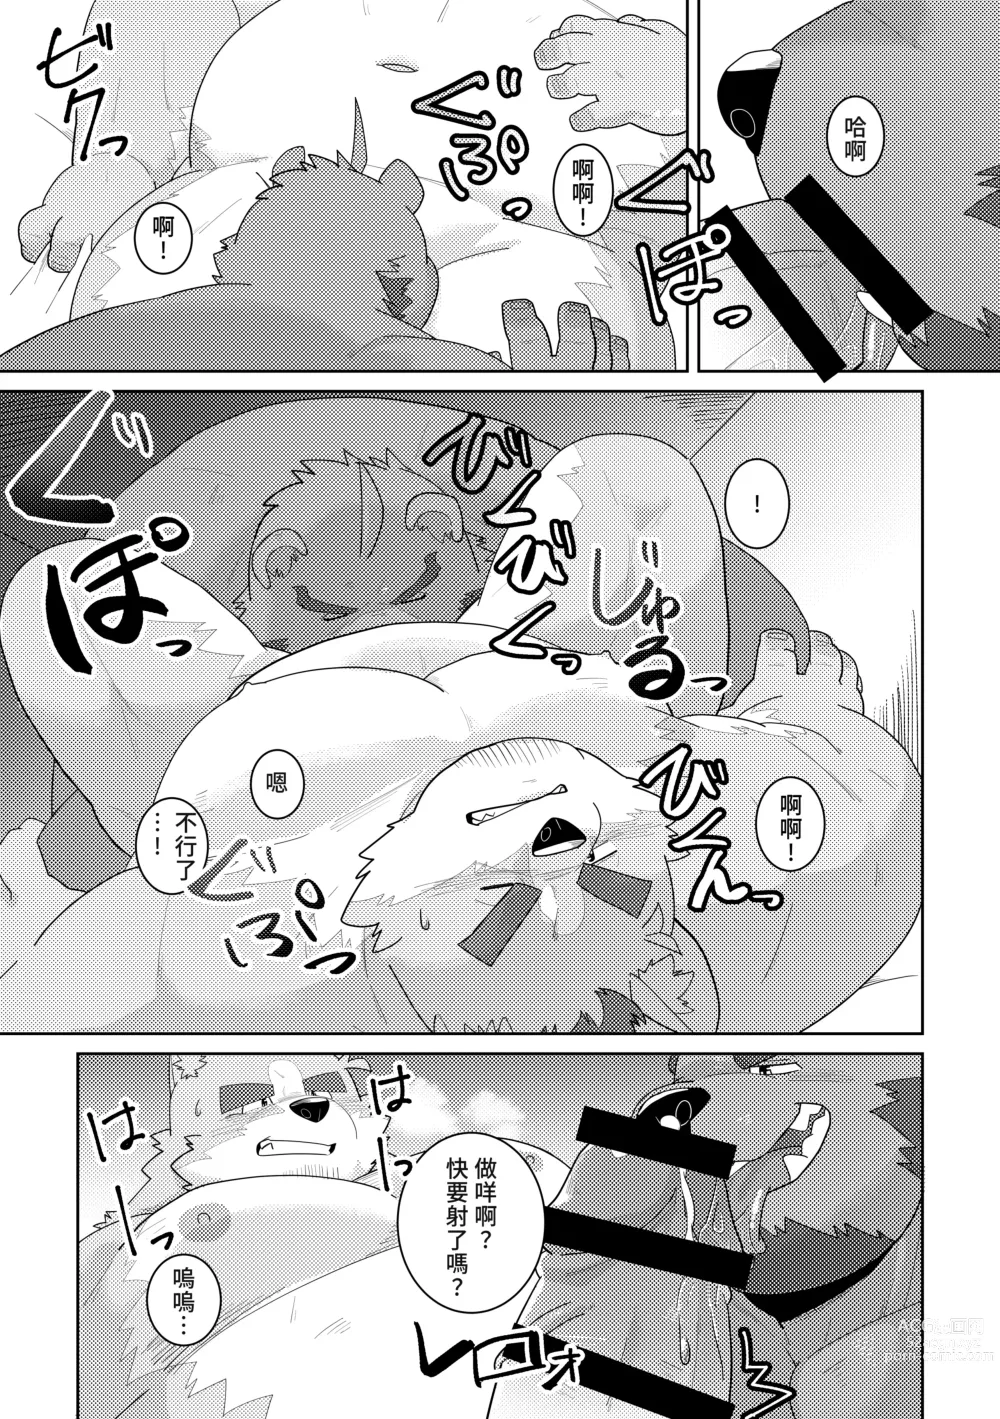 Page 15 of doujinshi 幽靈戀人